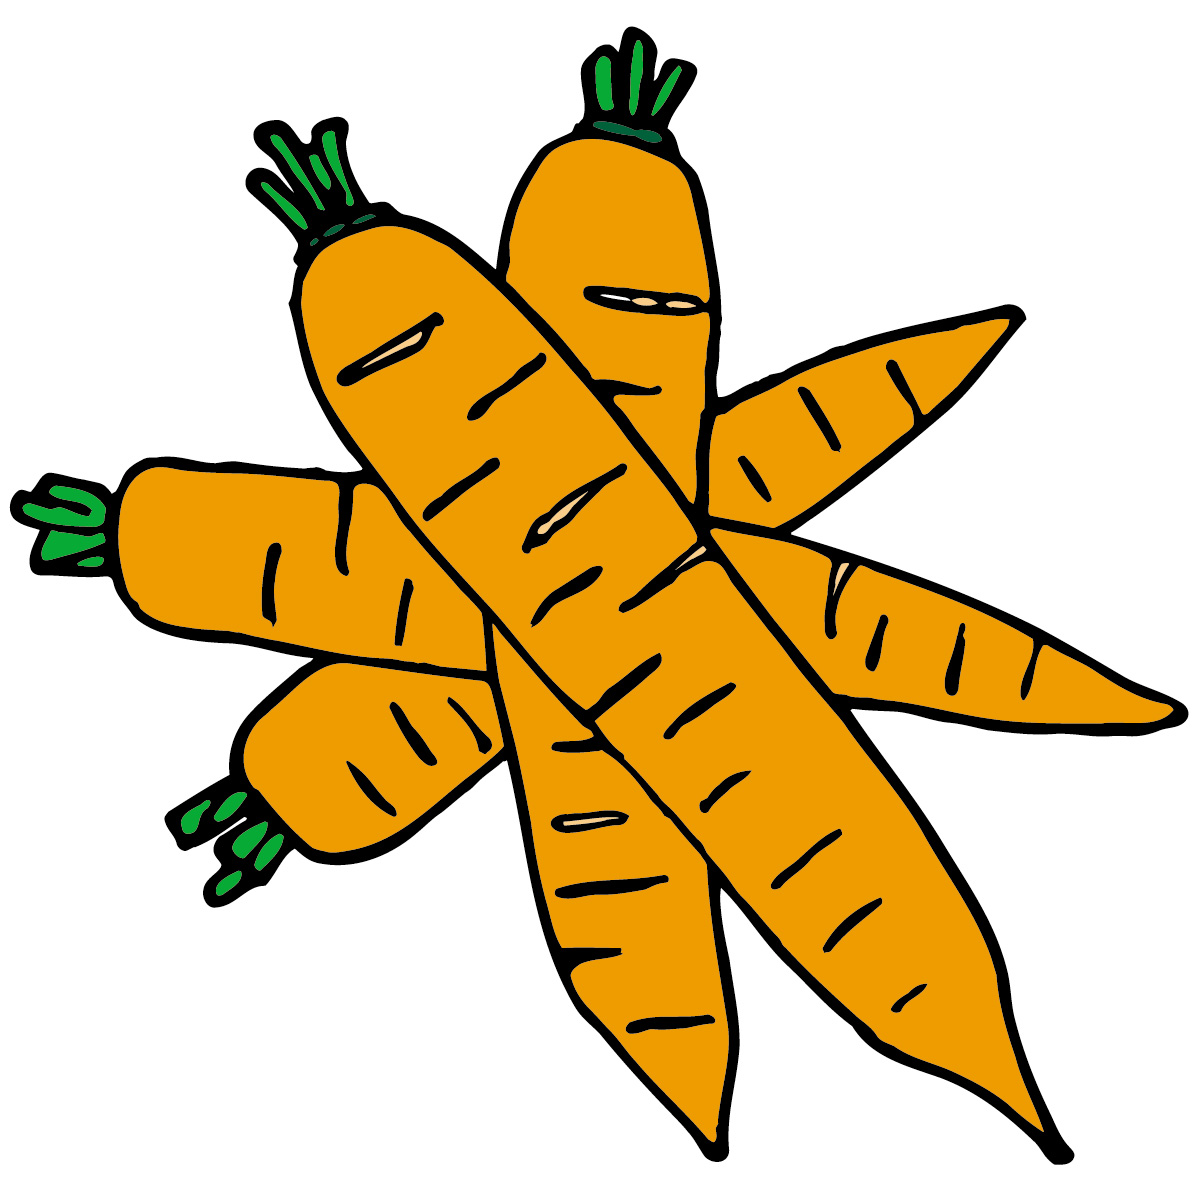 Fruit and vegetable clipart free images 3